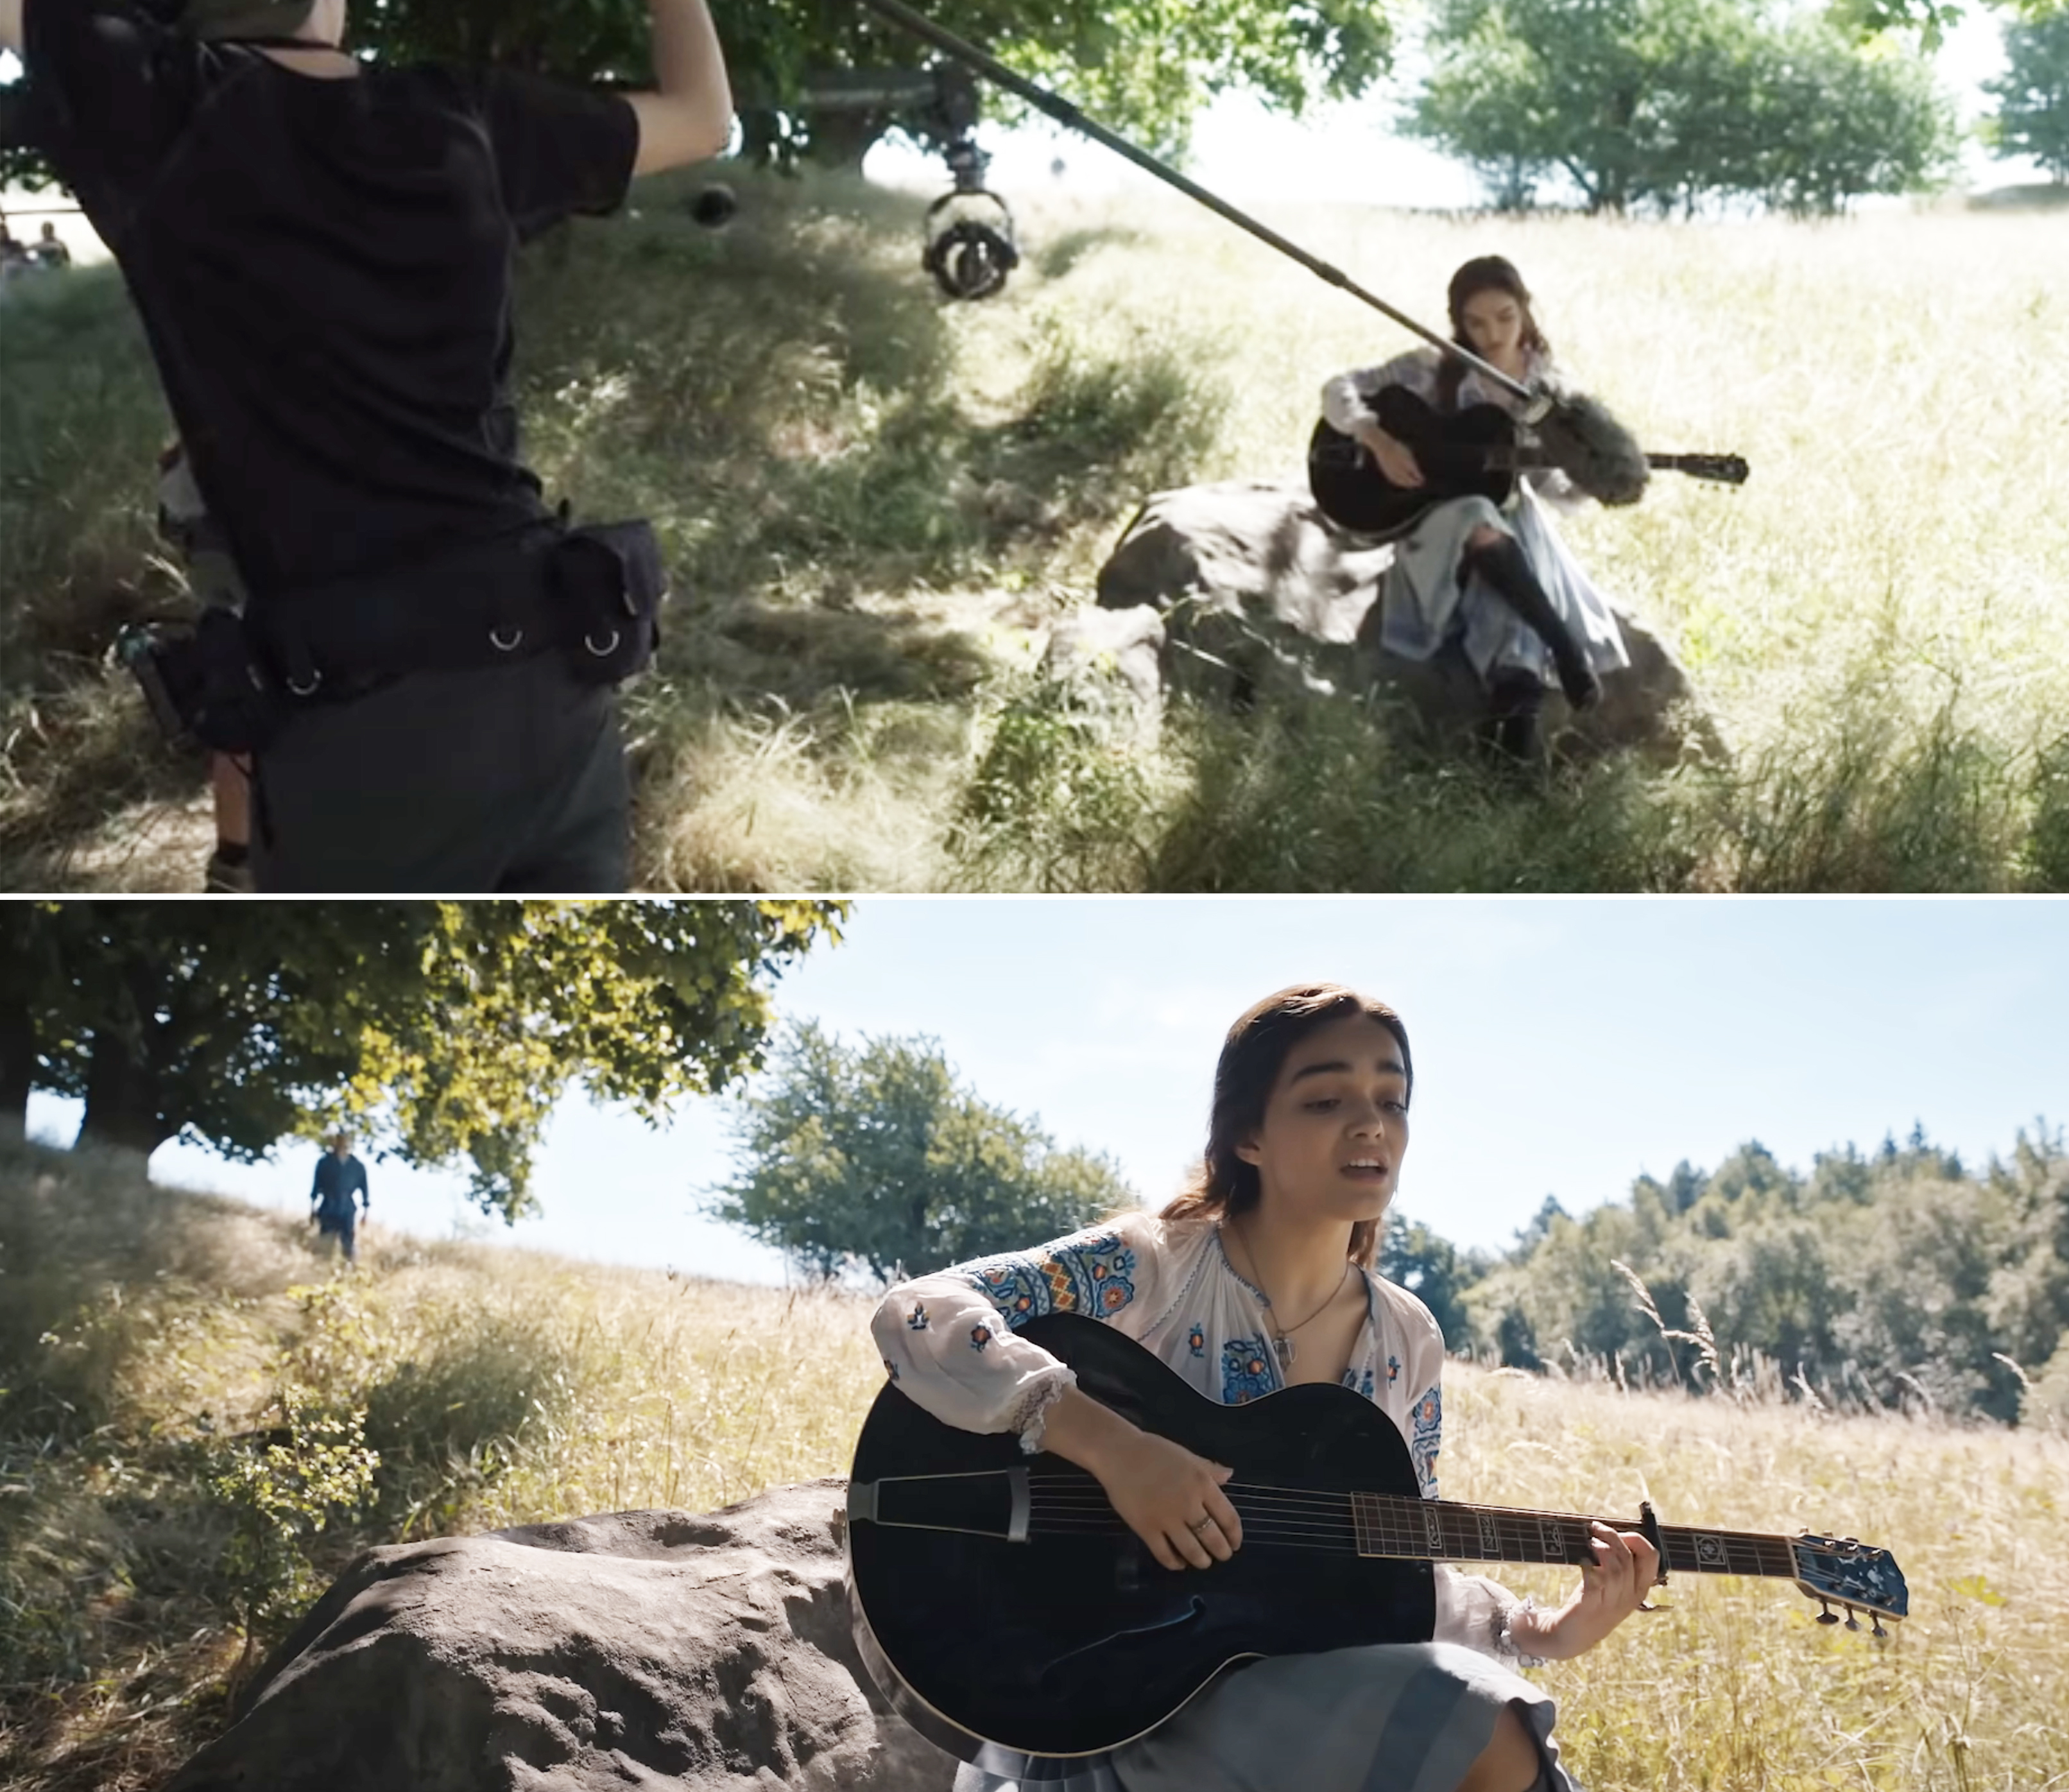 behind the scenes of her filming with a guitar in the field